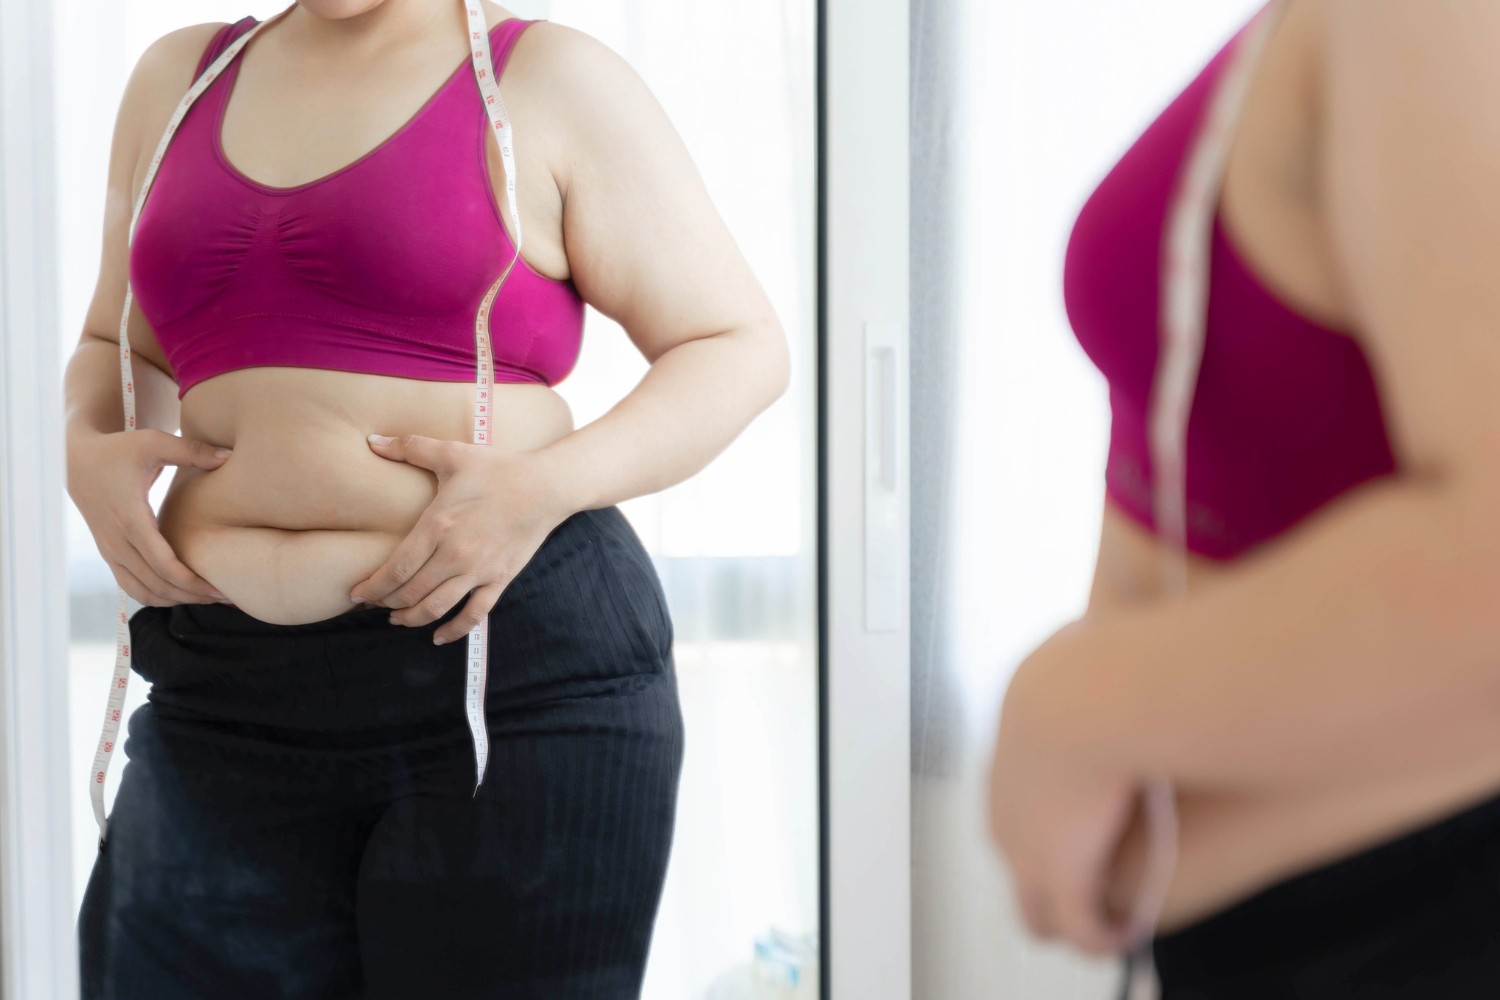 WHY WOMEN OFTEN HOLD EXTRA WEIGHT AROUND THEIR BELLIES AND WHAT YOU CAN DO ABOUT IT